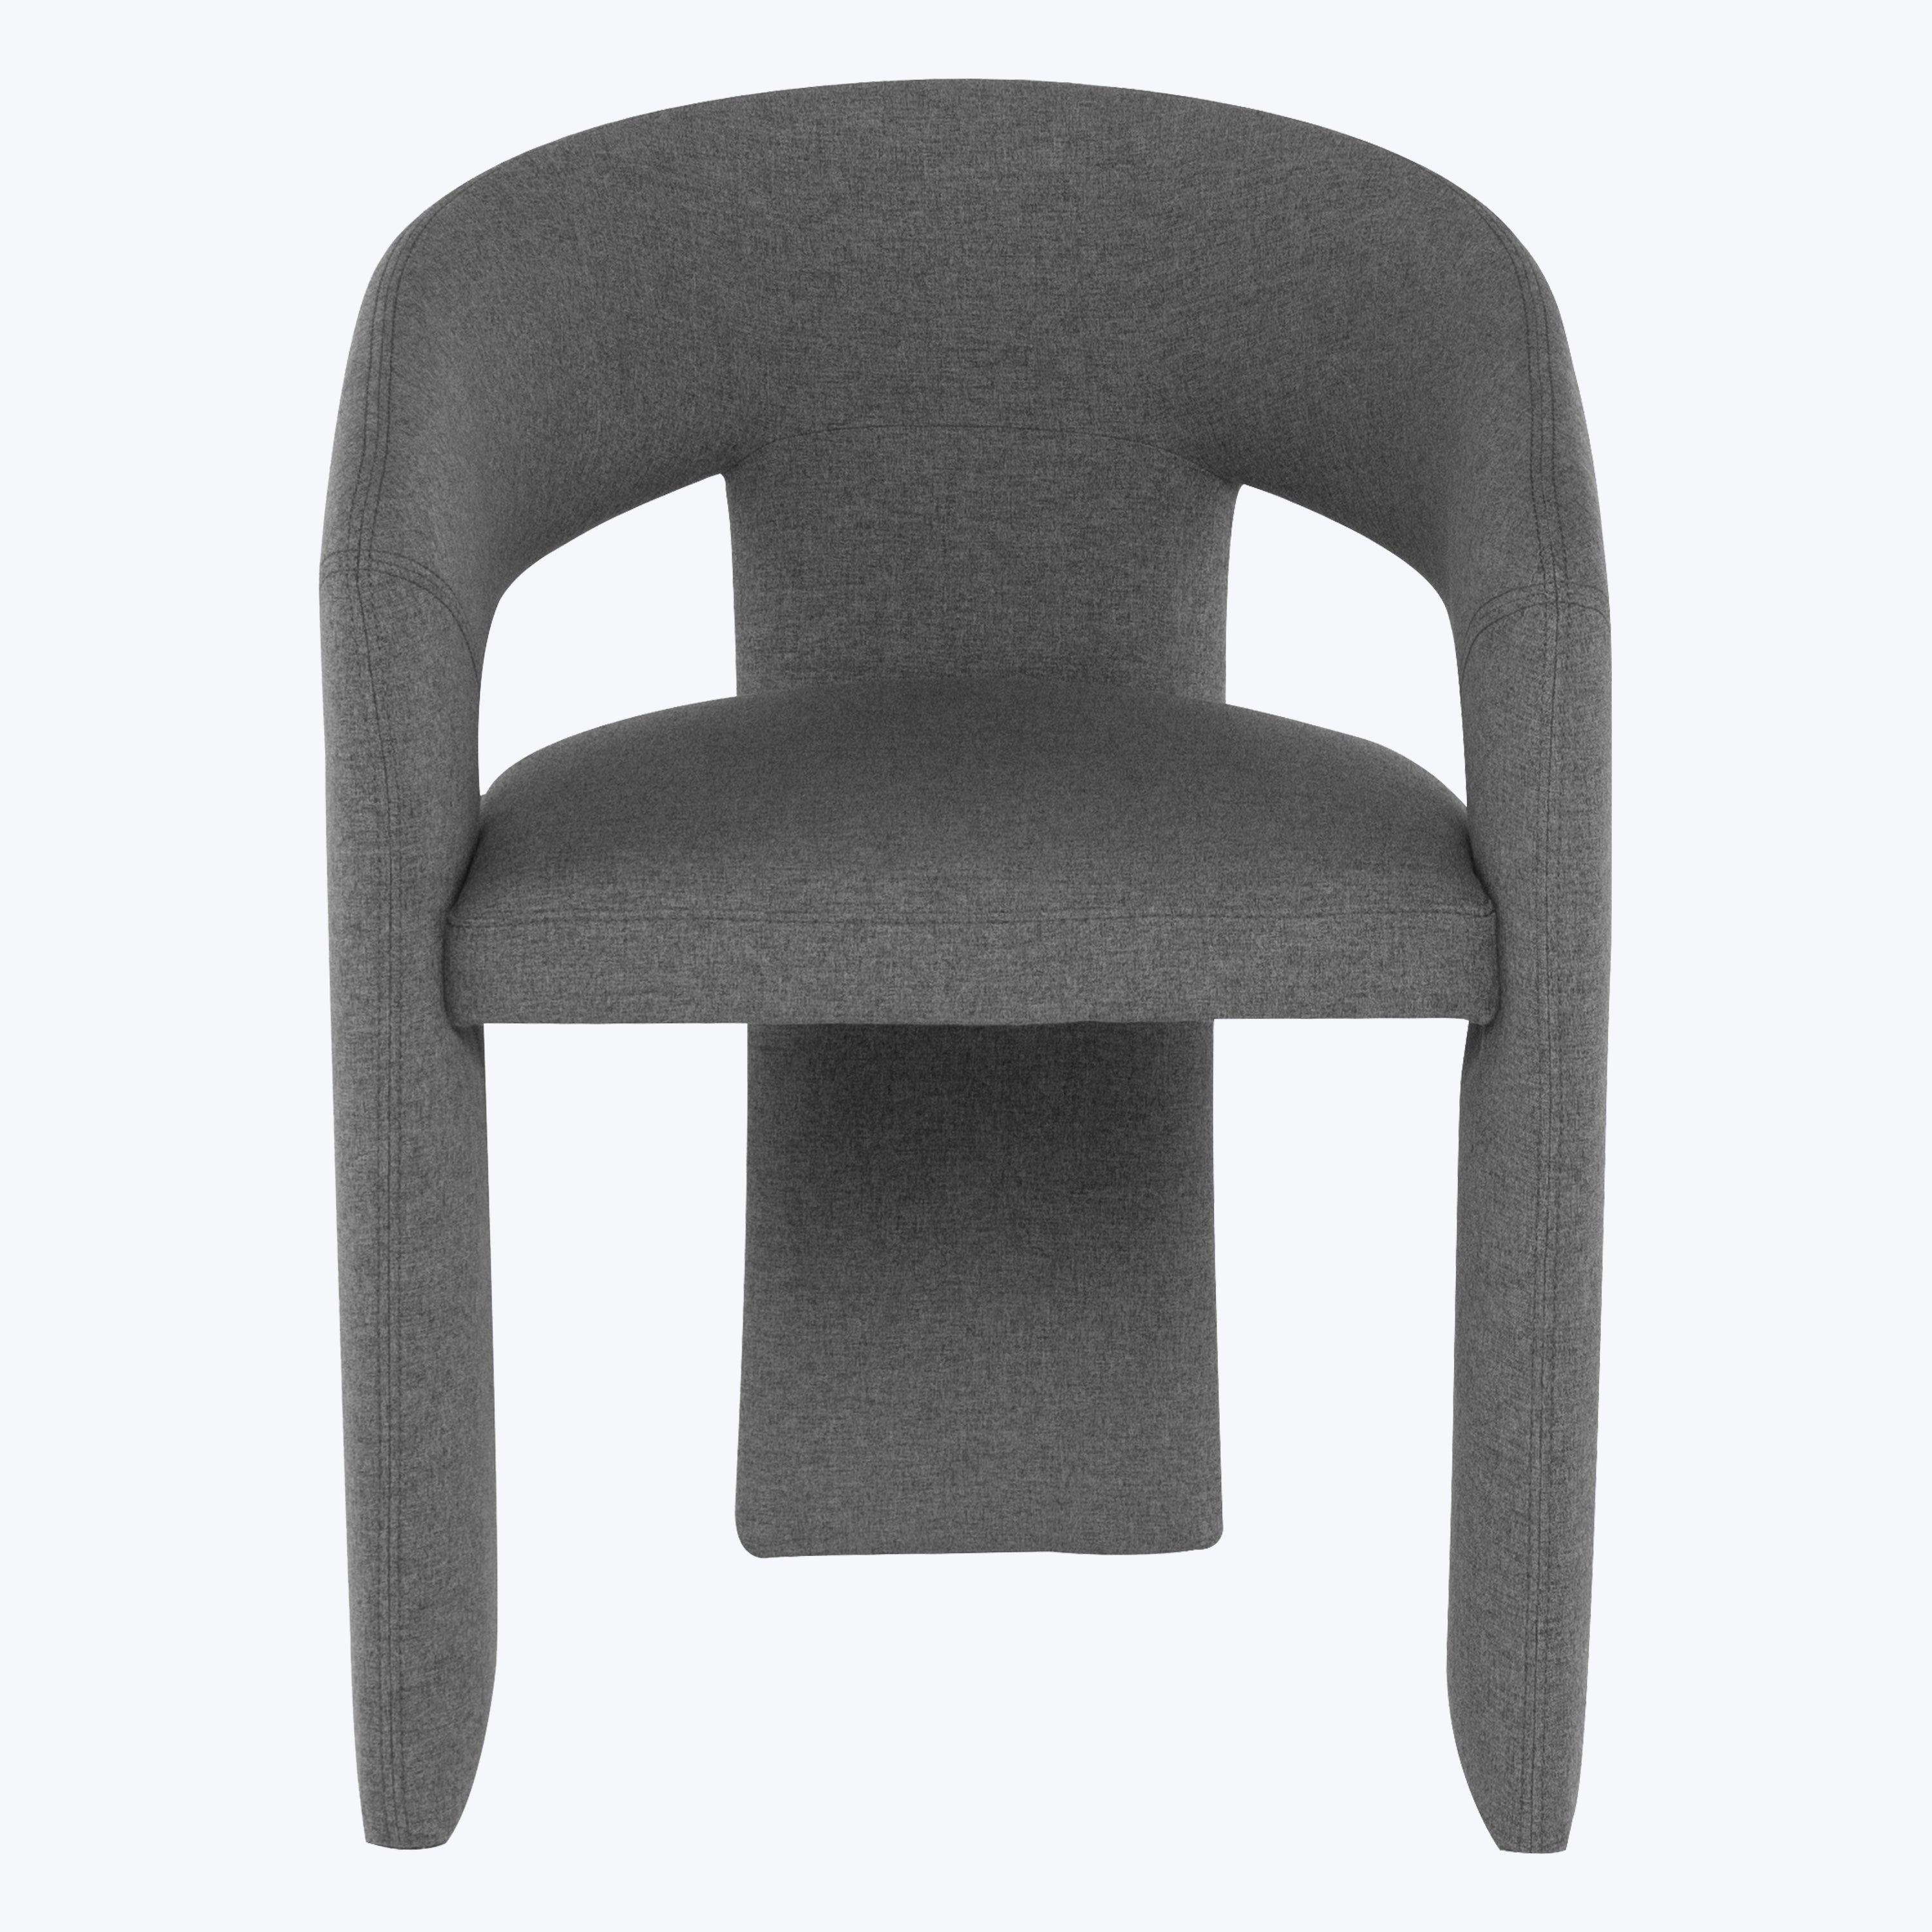 Anise Dining Chair Grey